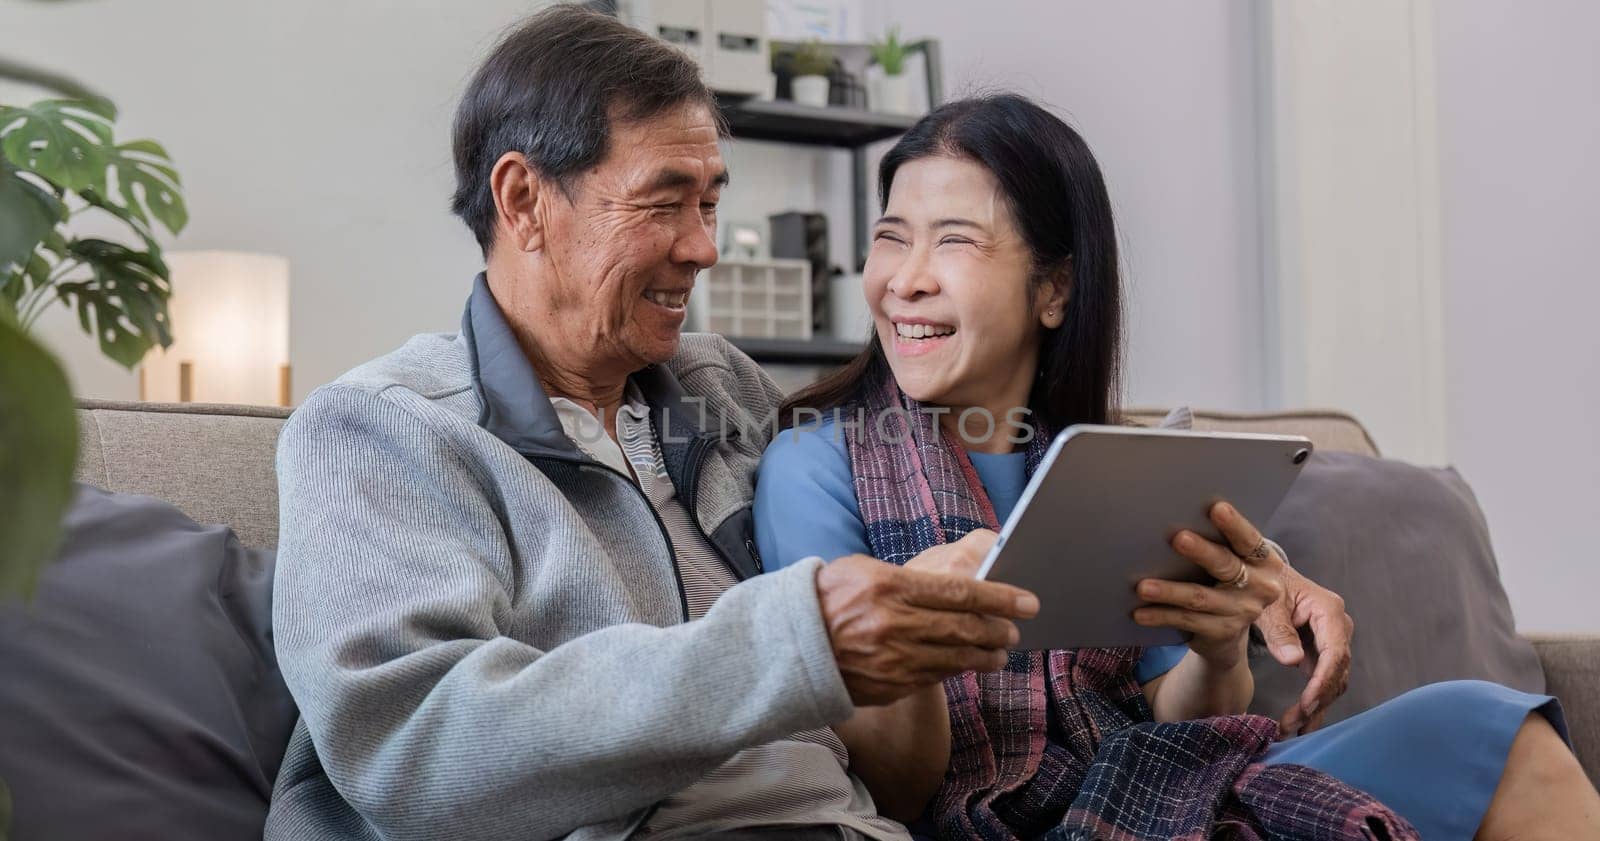 A senior couple in their 60s spends their free time sitting on a tablet, relaxing and watching entertainment programs, relaxing happily together on the sofa in the living room..